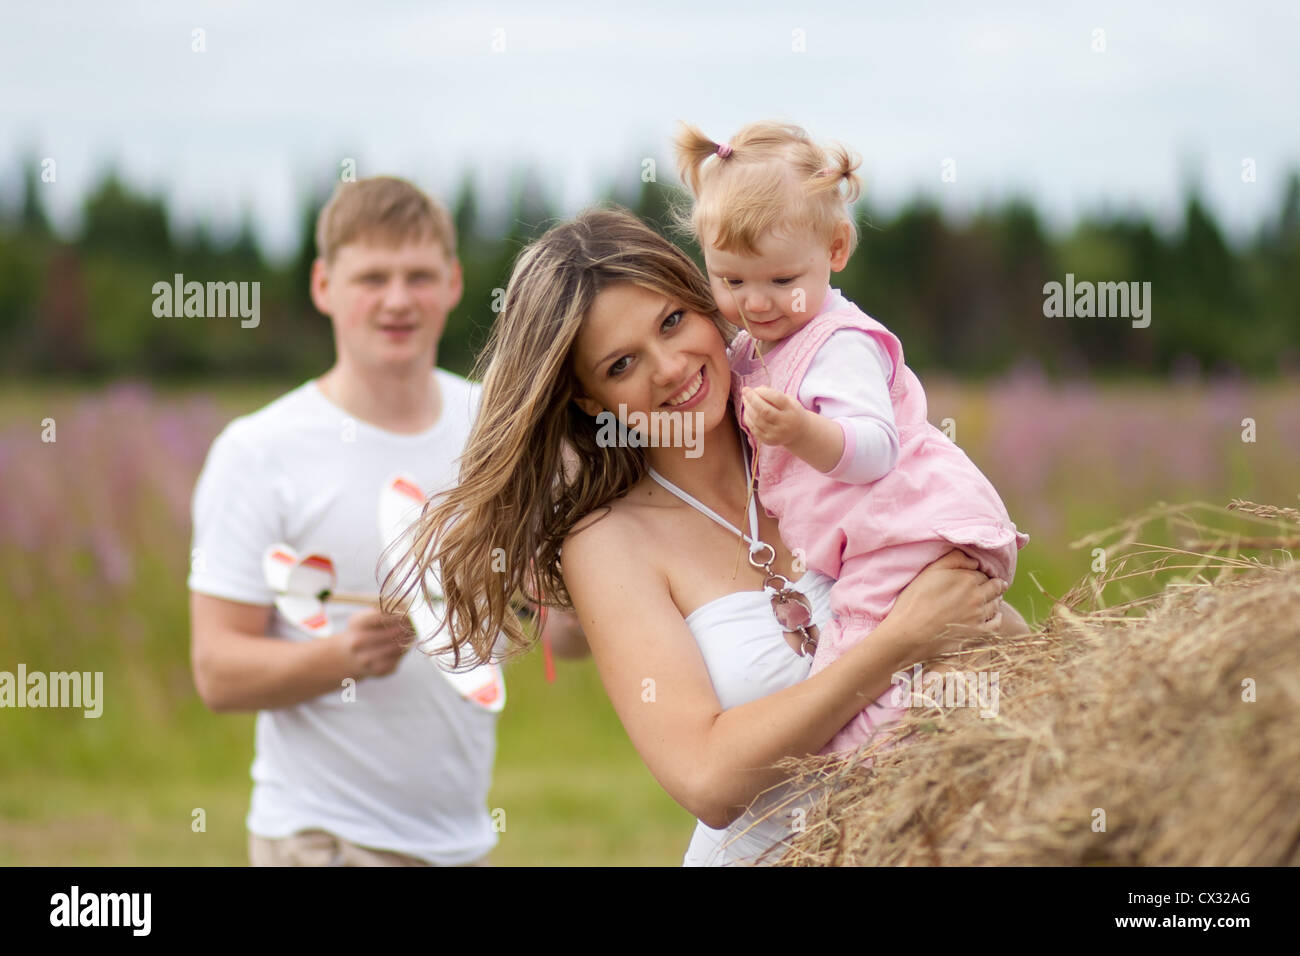 Happy mother and daughter with father in a background Stock Photo